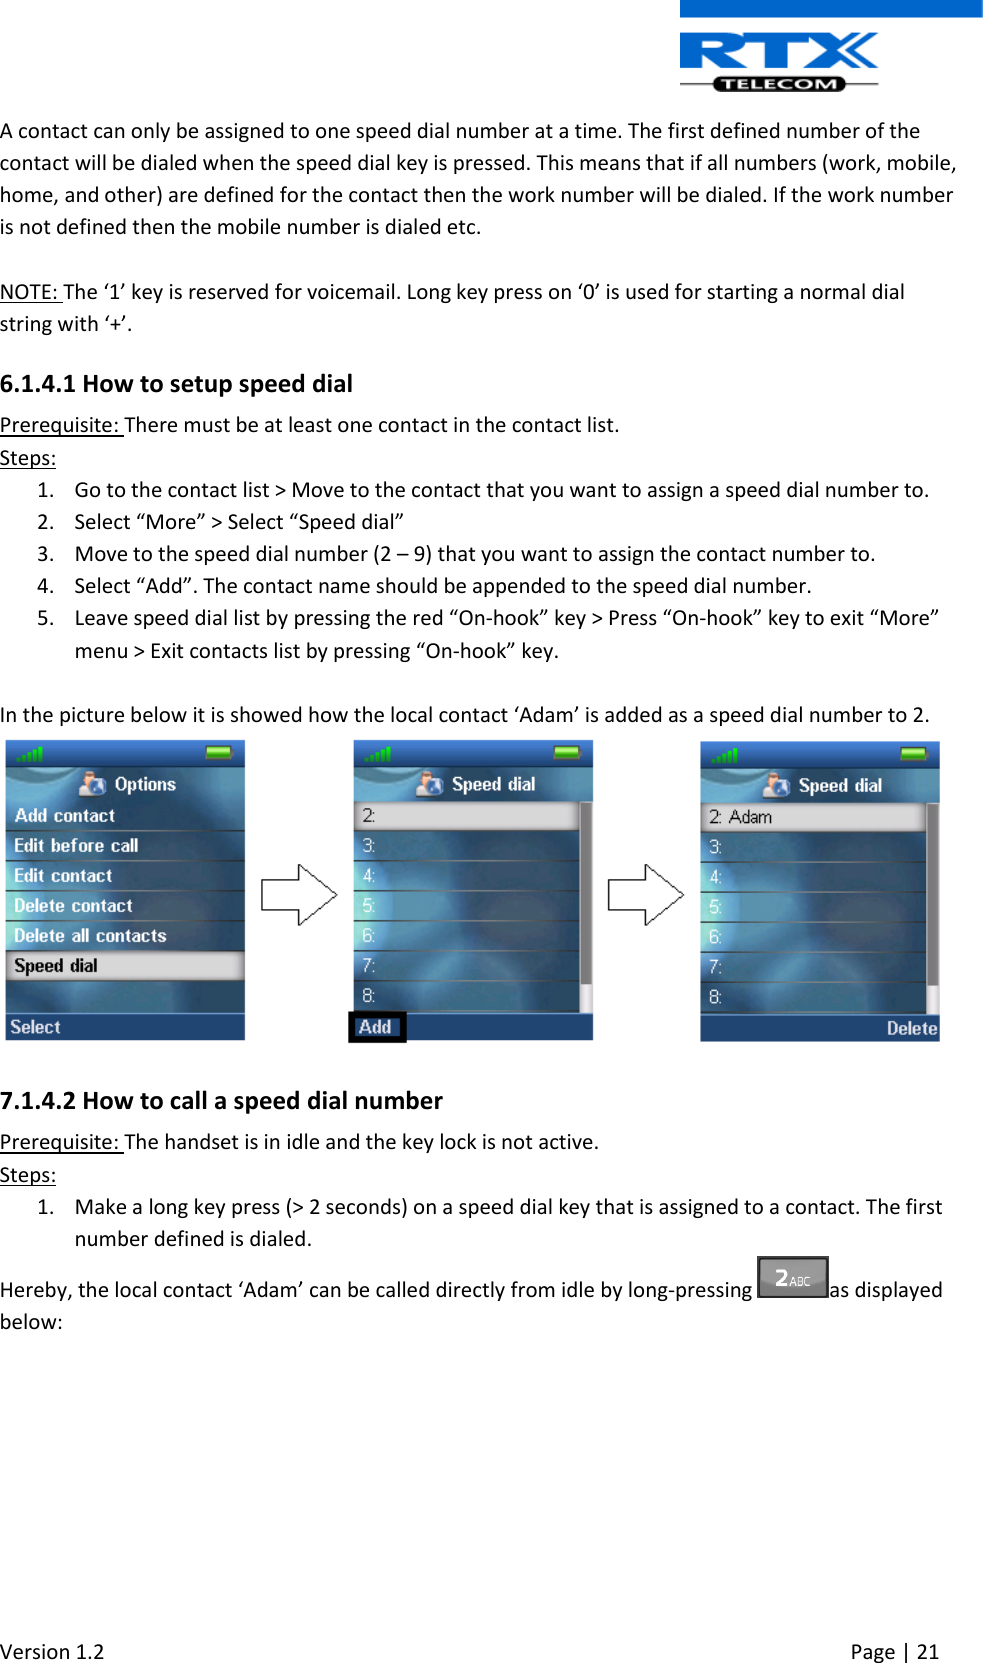  Version 1.2     Page | 21   A contact can only be assigned to one speed dial number at a time. The first defined number of the contact will be dialed when the speed dial key is pressed. This means that if all numbers (work, mobile, home, and other) are defined for the contact then the work number will be dialed. If the work number is not defined then the mobile number is dialed etc.  NOTE: The ‘1’ key is reserved for voicemail. Long key press on ‘0’ is used for starting a normal dial string with ‘+’. 6.1.4.1 How to setup speed dial Prerequisite: There must be at least one contact in the contact list. Steps: 1. Go to the contact list &gt; Move to the contact that you want to assign a speed dial number to. 2. Select “More” &gt; Select “Speed dial” 3. Move to the speed dial number (2 – 9) that you want to assign the contact number to. 4. Select “Add”. The contact name should be appended to the speed dial number. 5. Leave speed dial list by pressing the red “On-hook” key &gt; Press “On-hook” key to exit “More” menu &gt; Exit contacts list by pressing “On-hook” key.  In the picture below it is showed how the local contact ‘Adam’ is added as a speed dial number to 2.   7.1.4.2 How to call a speed dial number Prerequisite: The handset is in idle and the key lock is not active. Steps: 1. Make a long key press (&gt; 2 seconds) on a speed dial key that is assigned to a contact. The first number defined is dialed. Hereby, the local contact ‘Adam’ can be called directly from idle by long-pressing  as displayed below: 